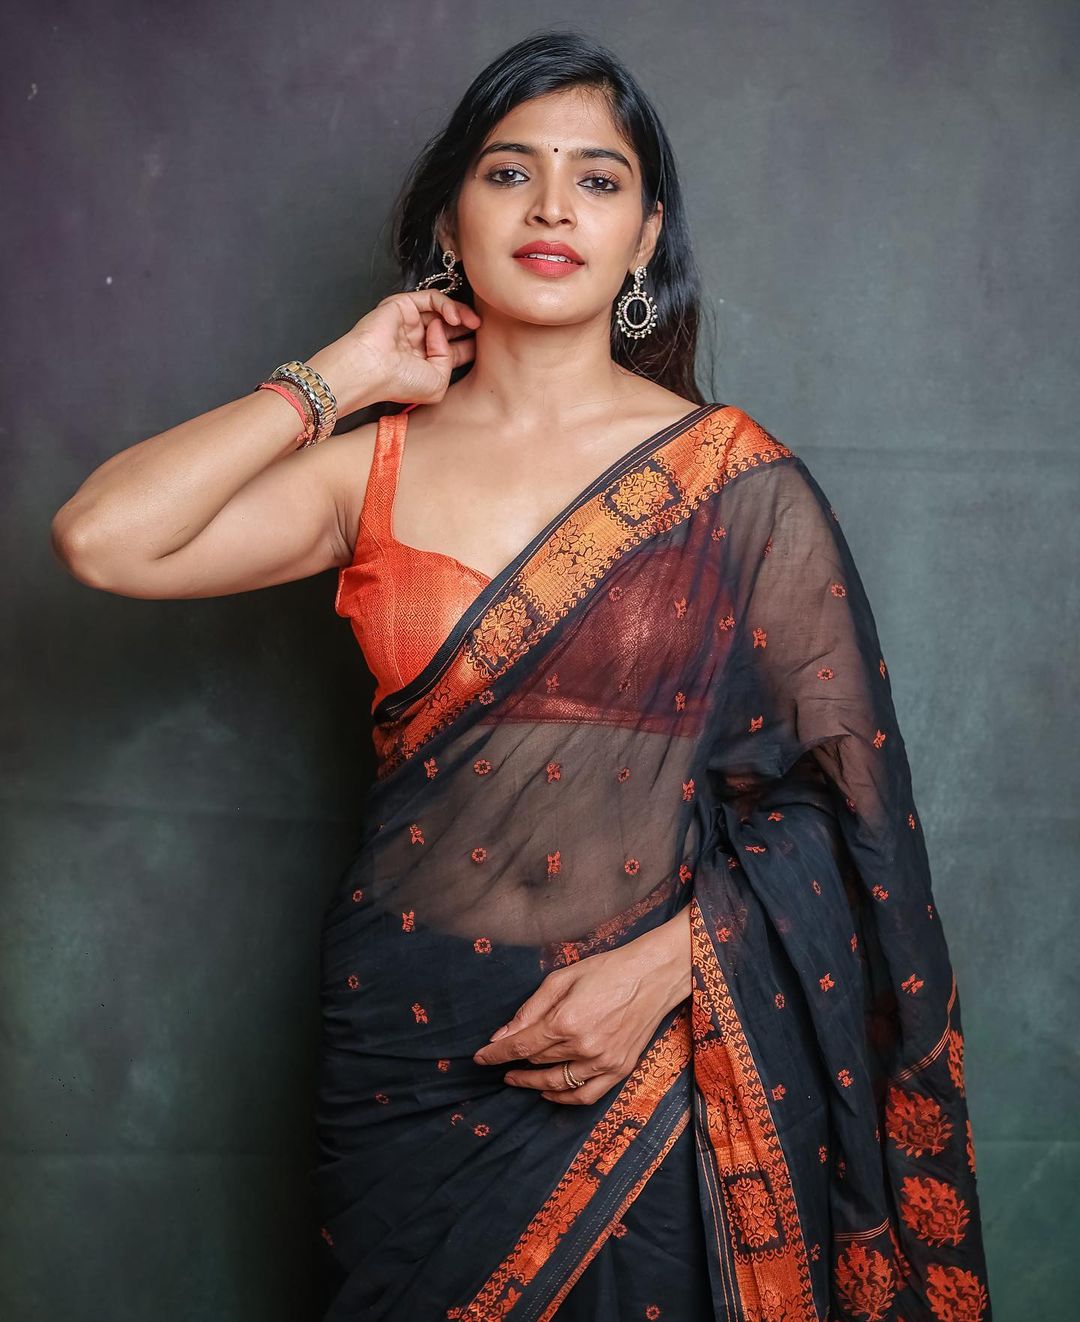 Actress sanchita shetty hot images trending in social media-Actresssanchita, Sanchita Shetty Photos,Spicy Hot Pics,Images,High Resolution WallPapers Download